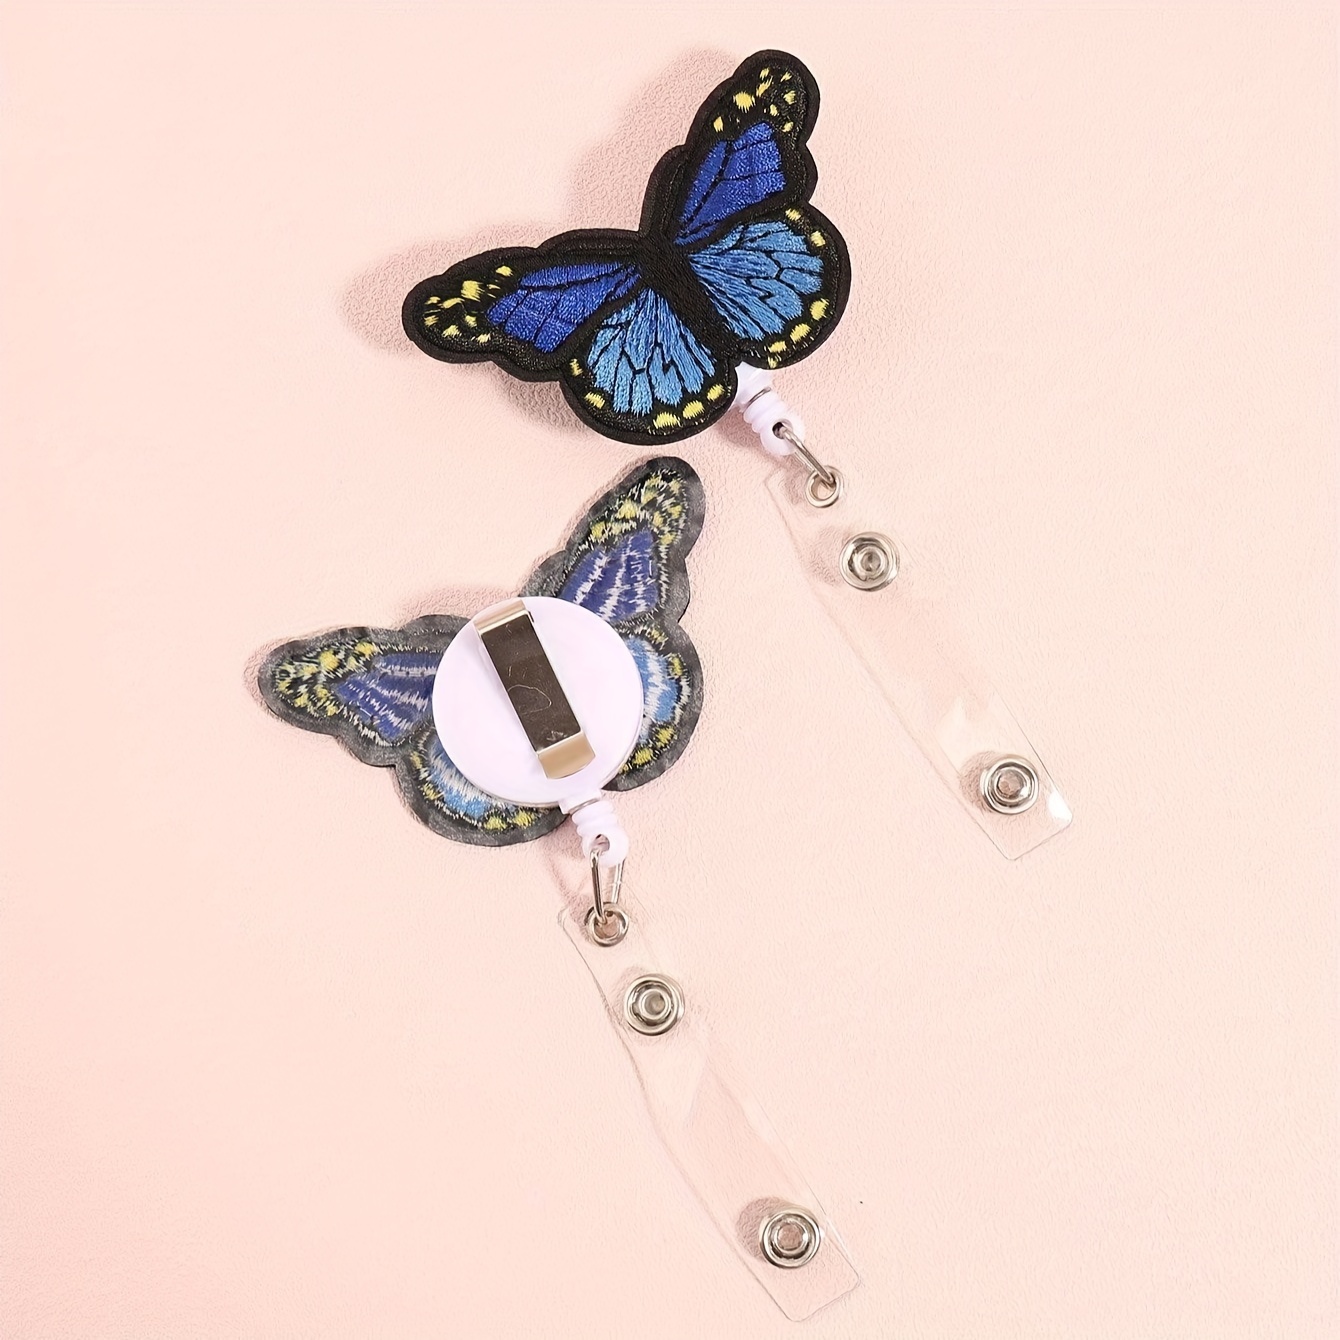 Butterfly Badge Reel 8 Pcs Butterfly Easy Pull Button Belt Clip Badge  Butterfly Badge Holder Retractable Belt Clip Cute Badge Reels Badge Clip  Badge